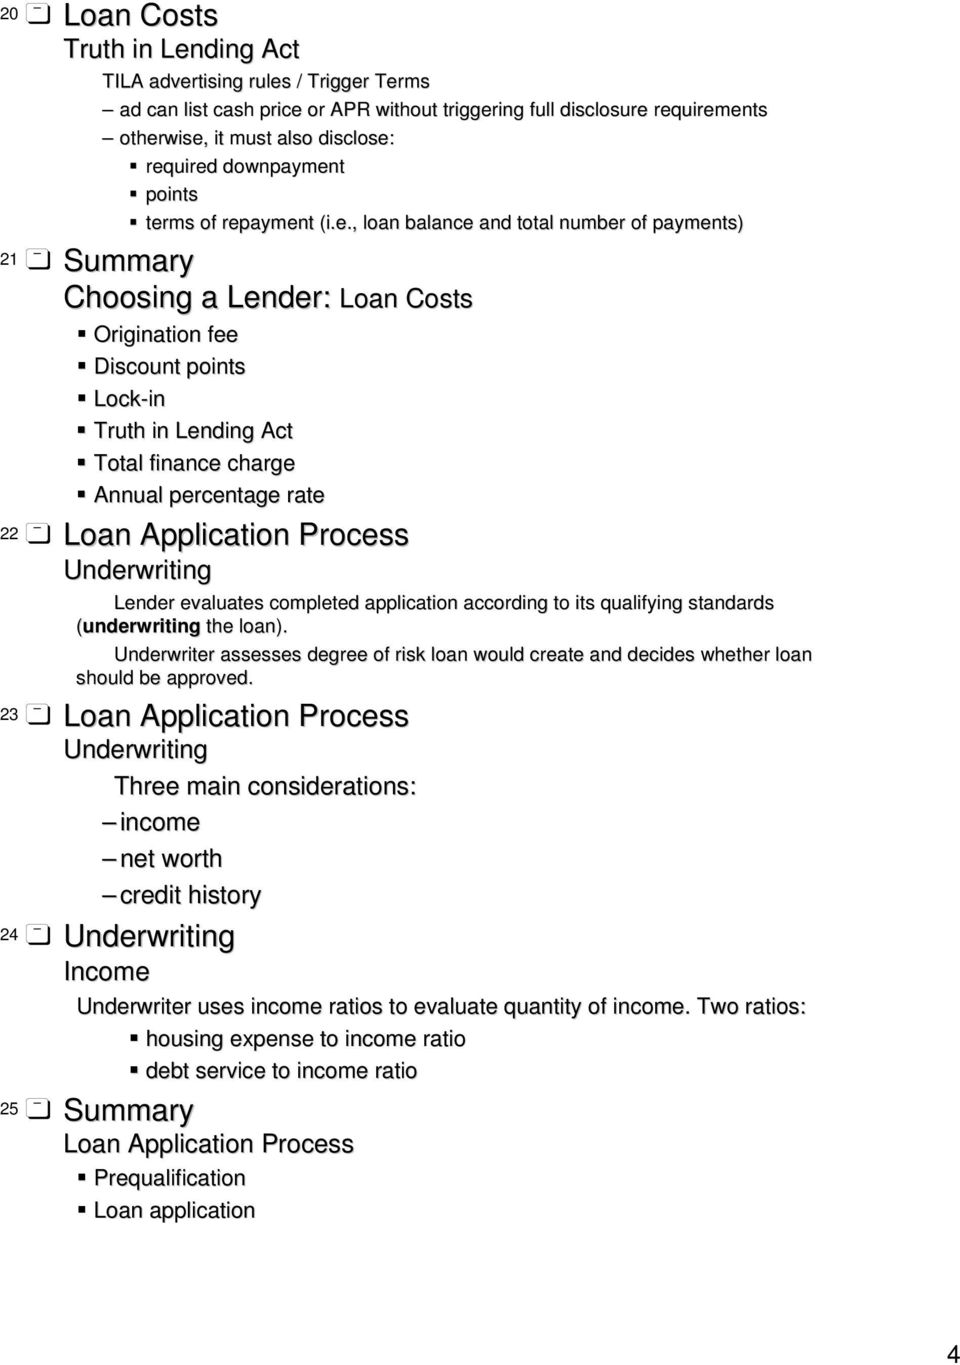 ayment (i.e., loan balance and total number of payments) 21 Summary Choosing a Lender: Loan Costs Origination fee Discount points Lock-in Total finance charge Annual percentage rate 22 Loan